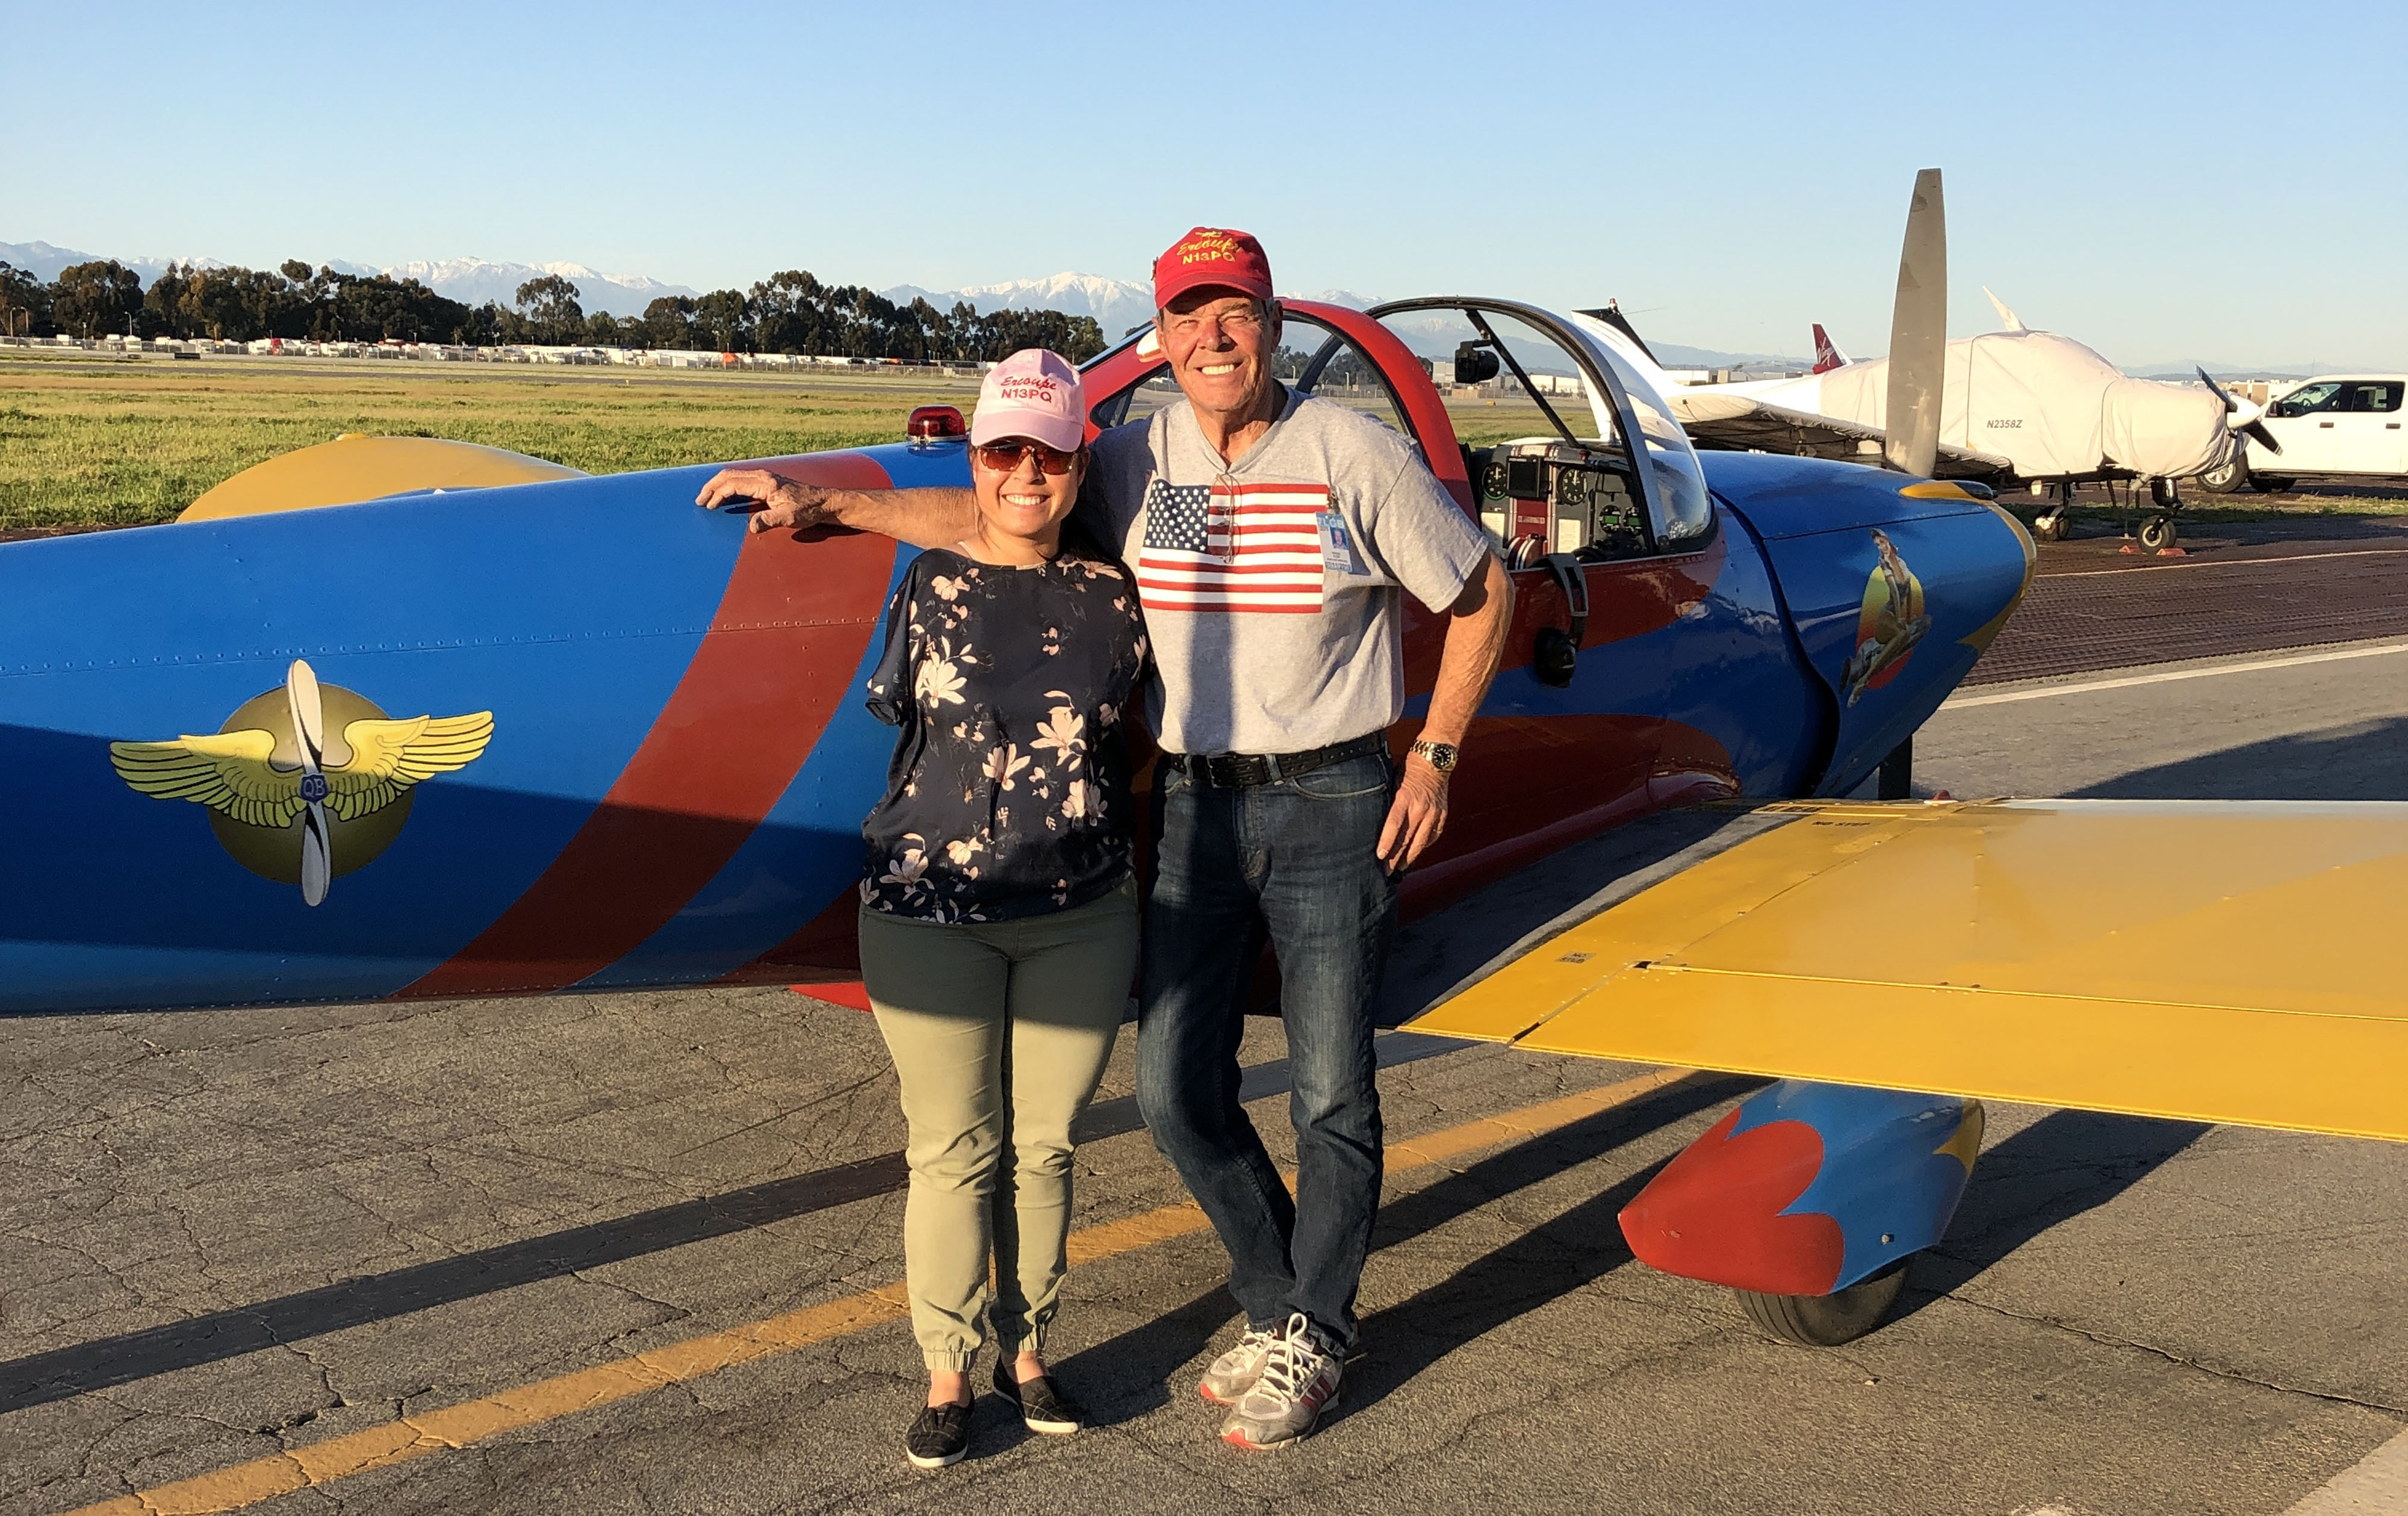 Early mentorship from Aircraft Spruce transforms youth into pilot